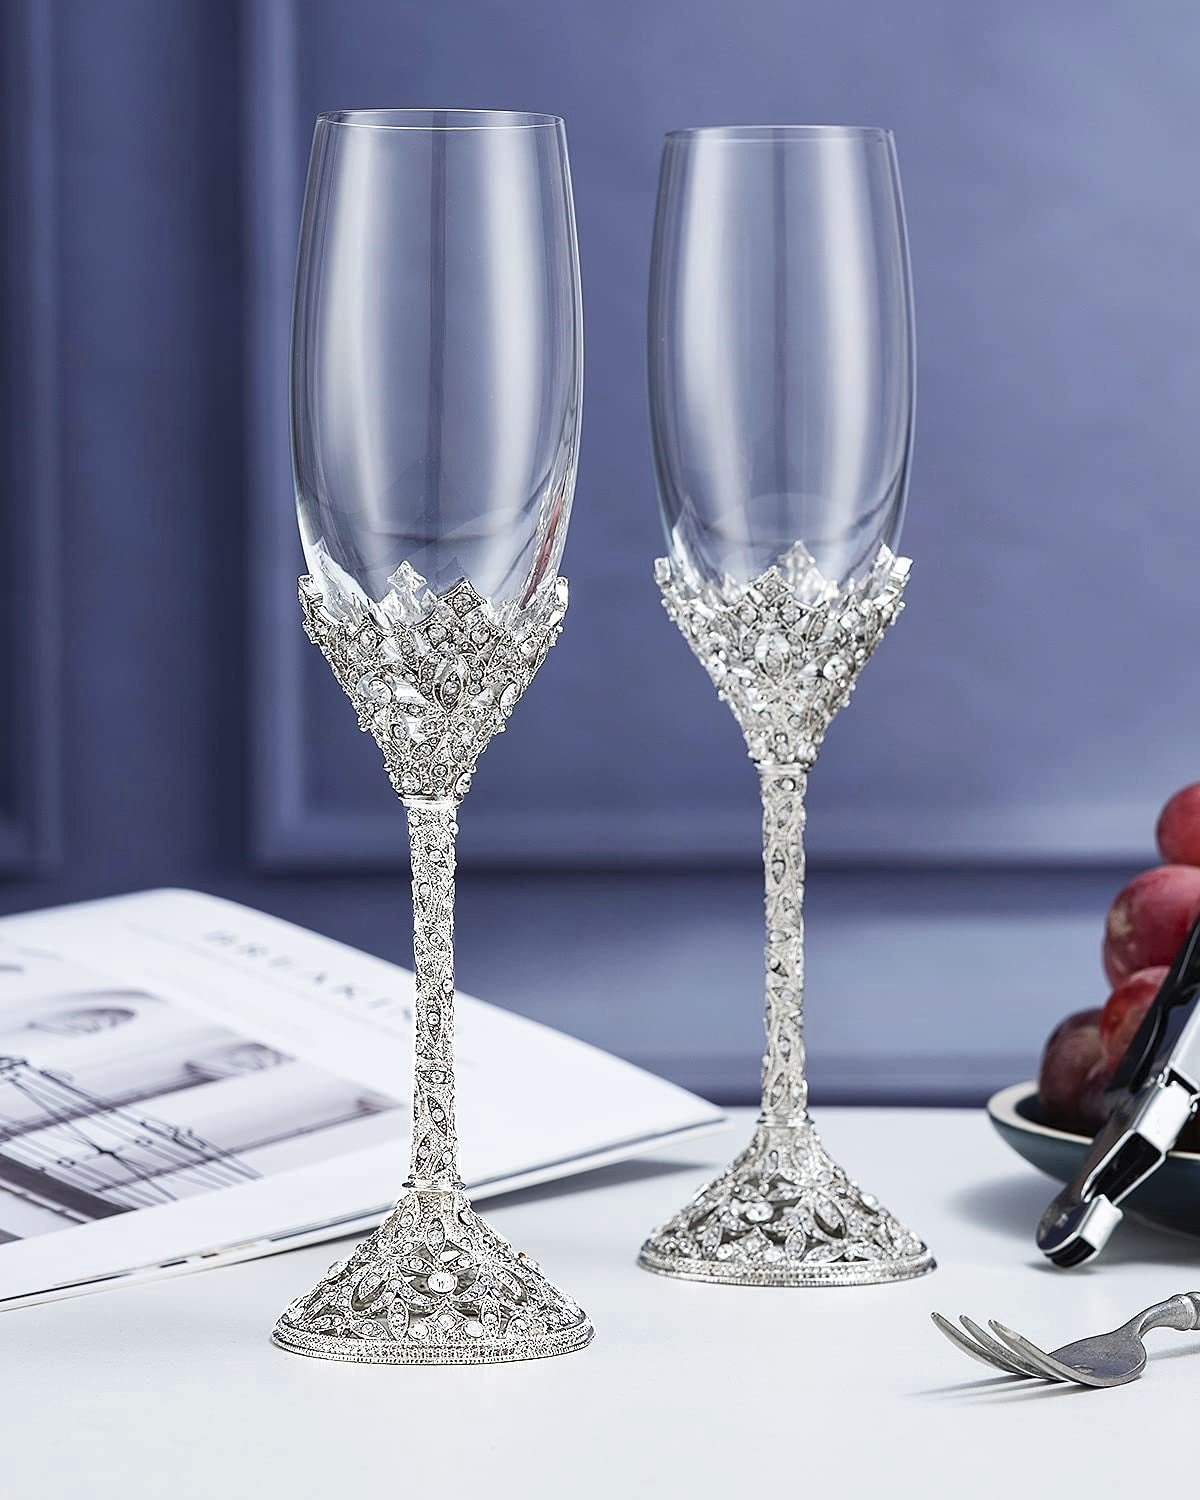 Champagne Coupe vs Flute: What's The Difference?